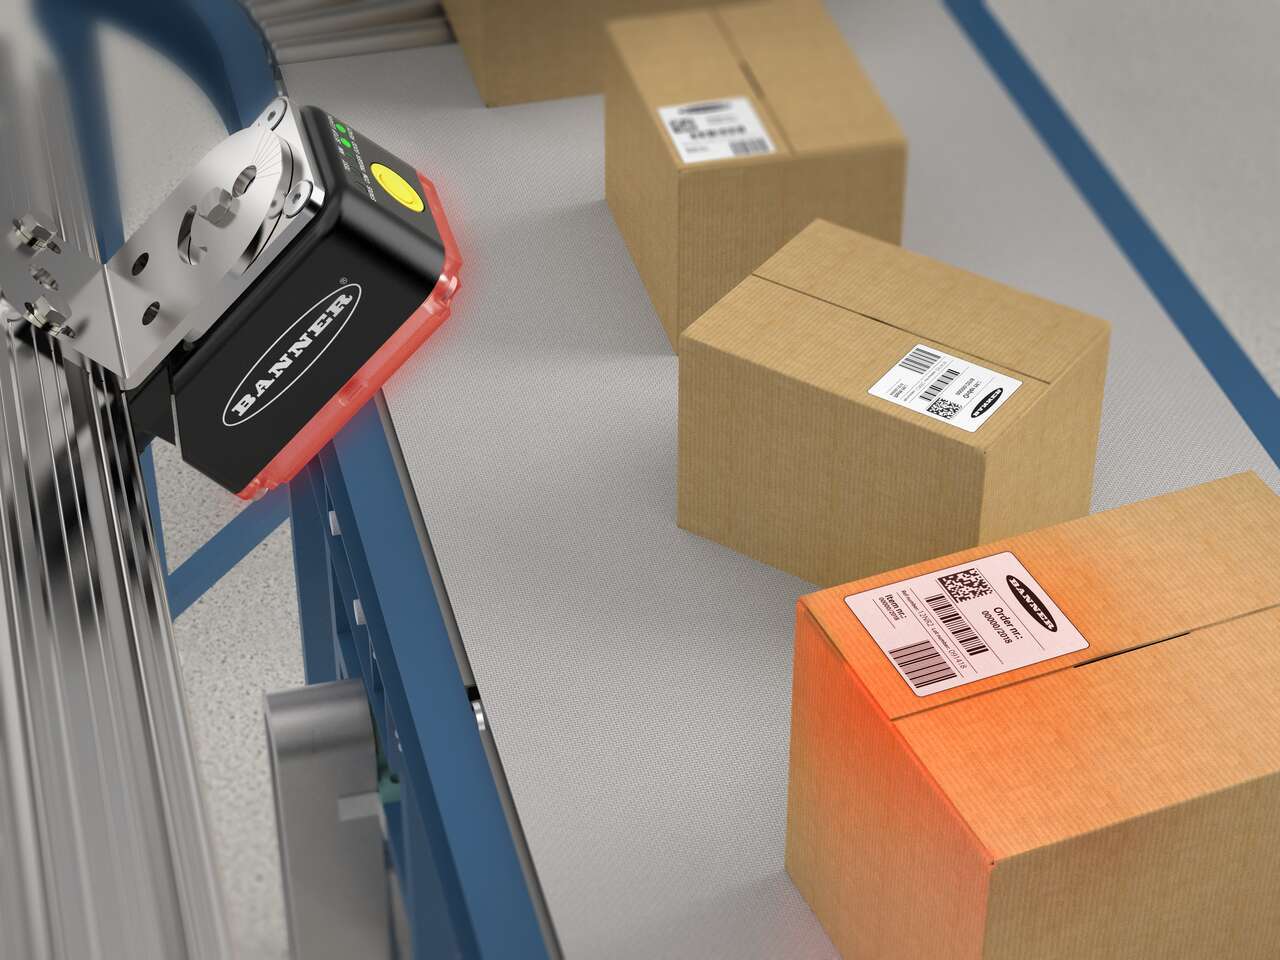 ABR 7000 barcode reader scans 1D and 2D codes on boxes